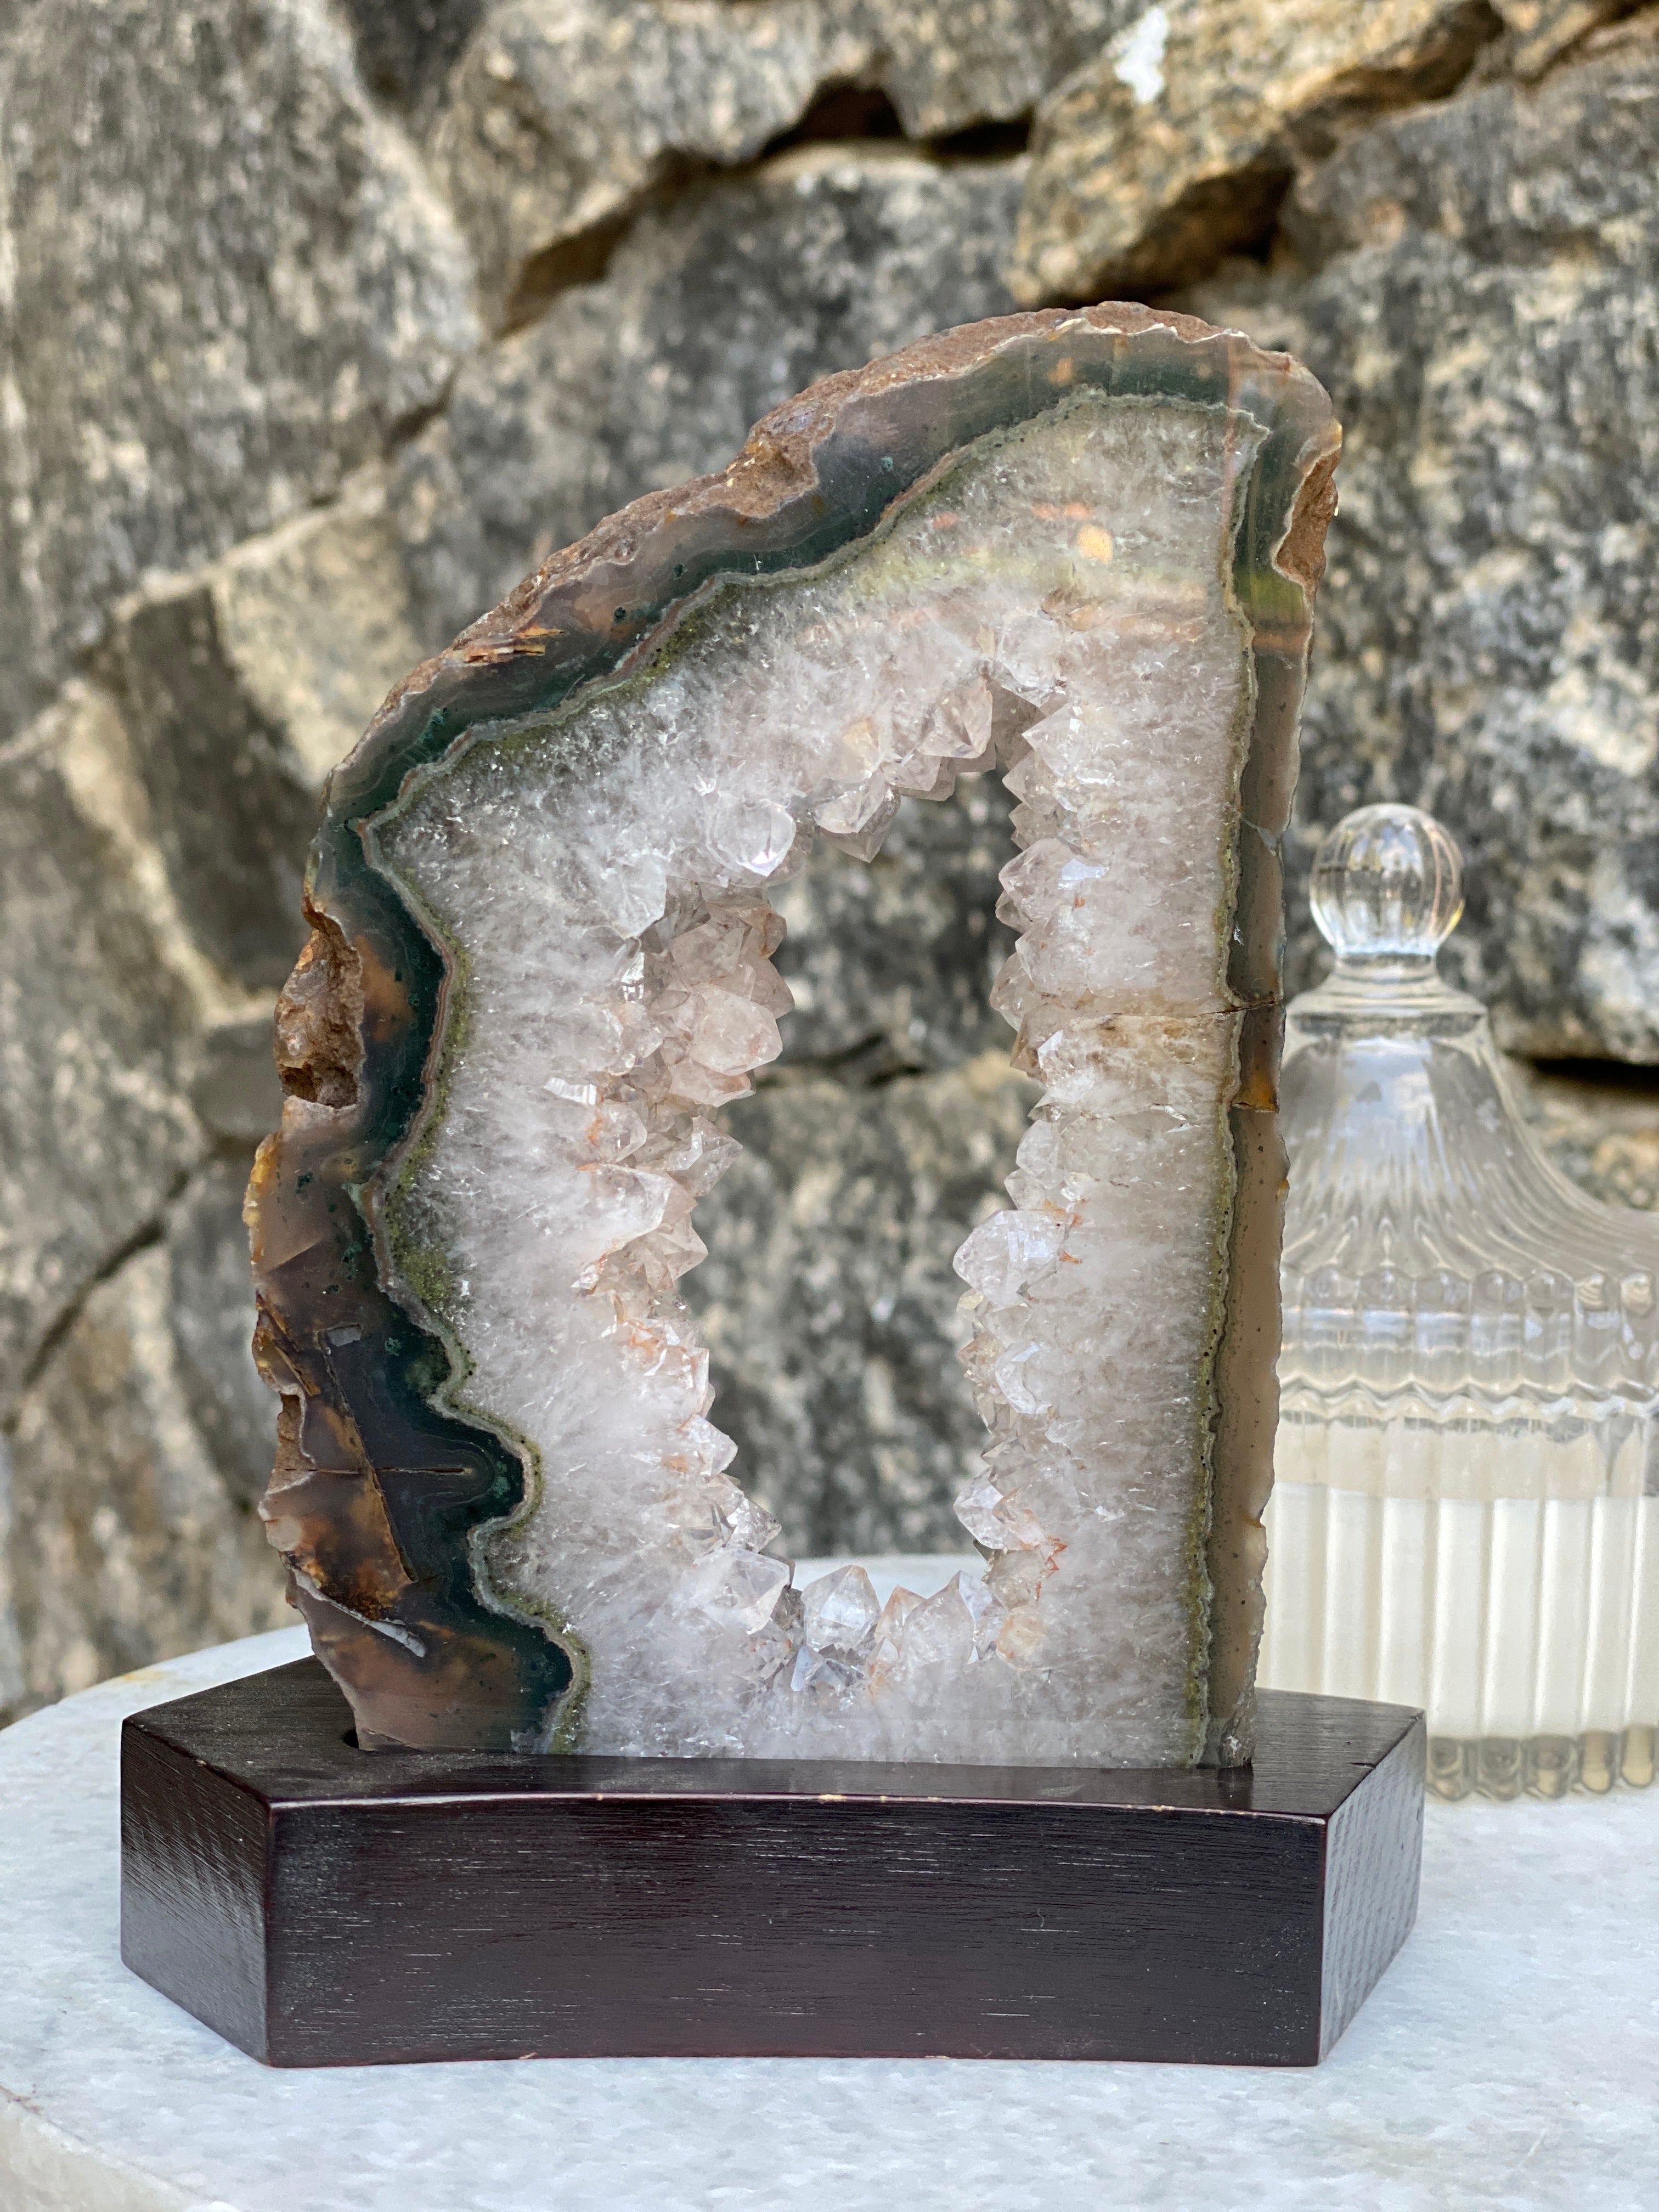 Large (5.5 in.) Clear Crystal Slice with wooden base included, Natural Crystal for Home Decor